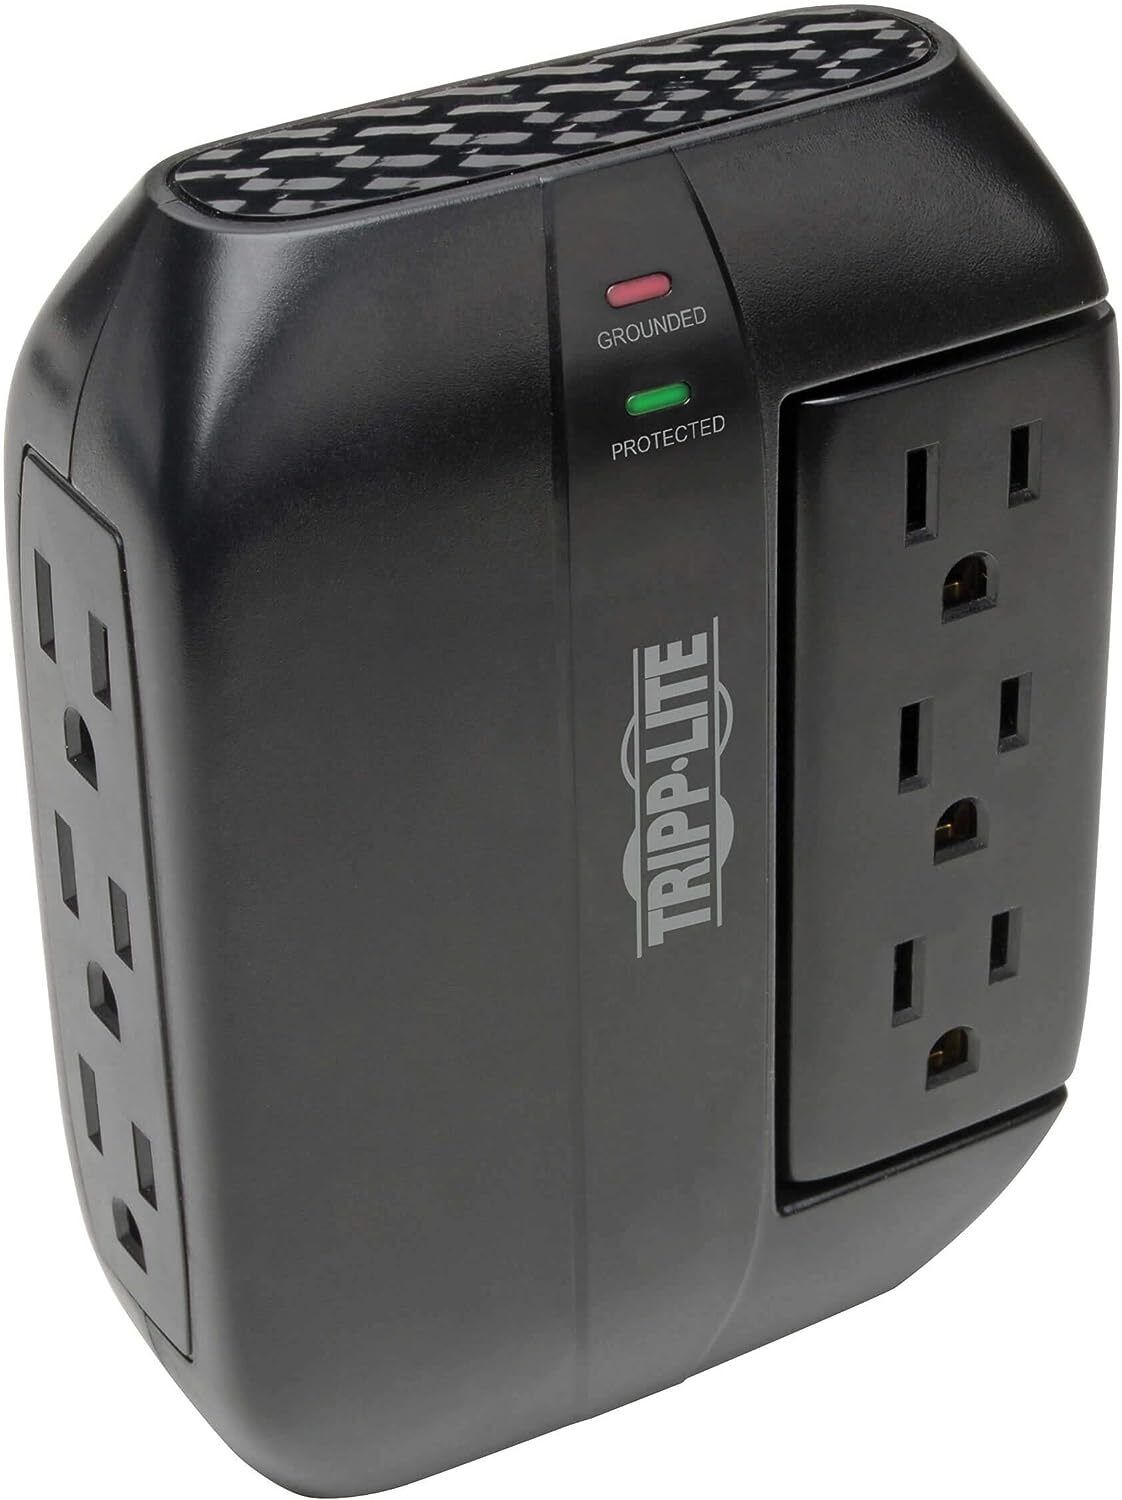 Tripp Lite SWIVEL6 6 Outlet Surge Protector Power Strip, 3 Rotatable Outlets,